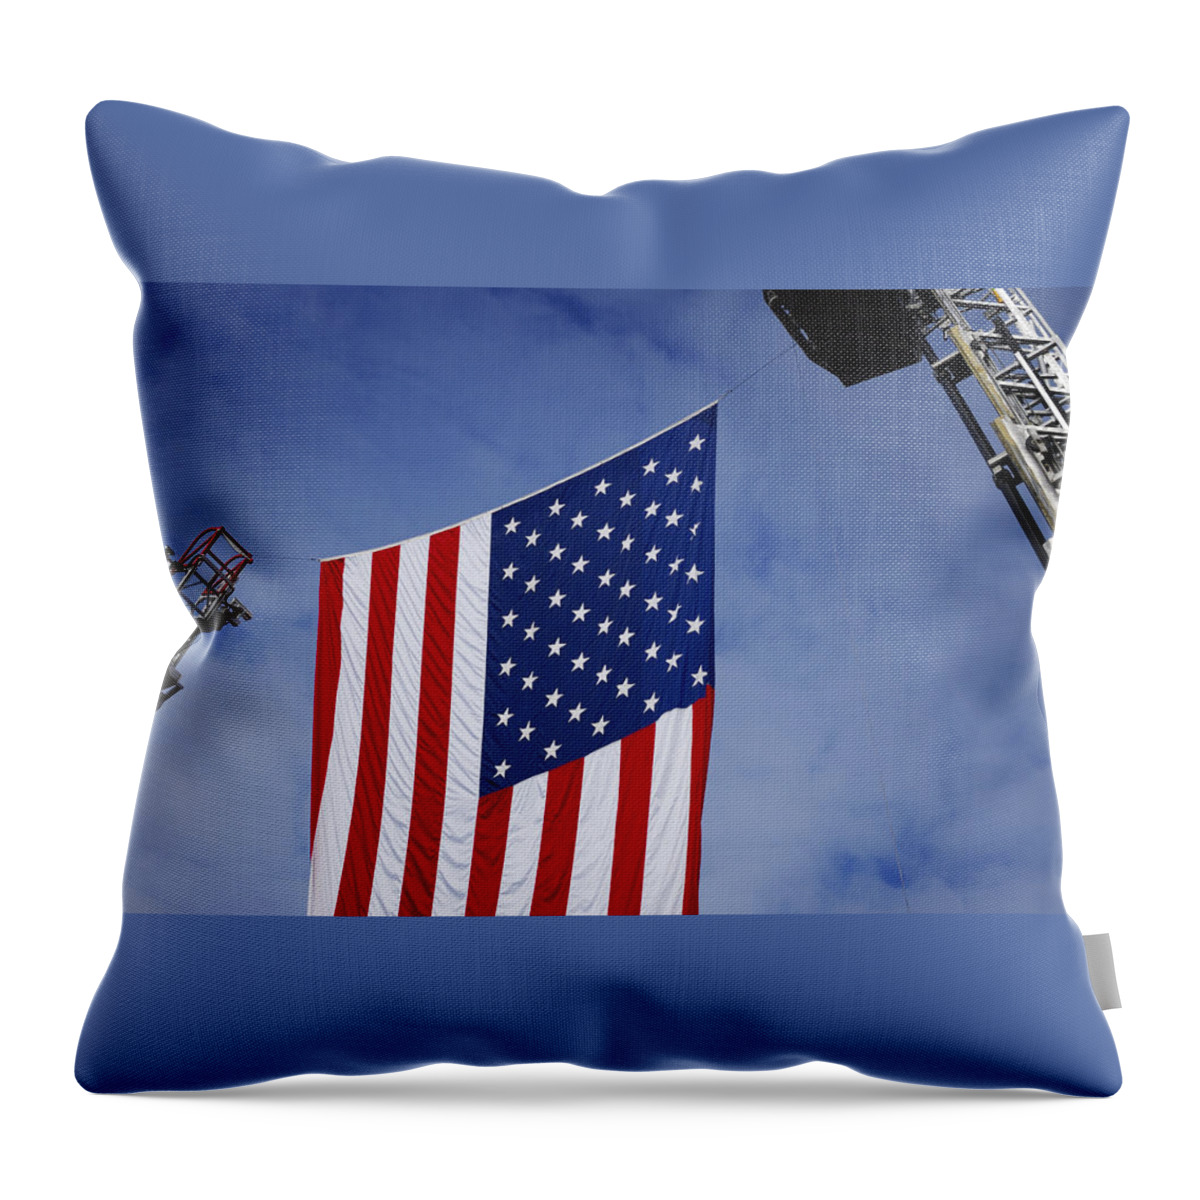  Flag Throw Pillow featuring the photograph United States Flag Between Fire Ladders by Phil Cardamone